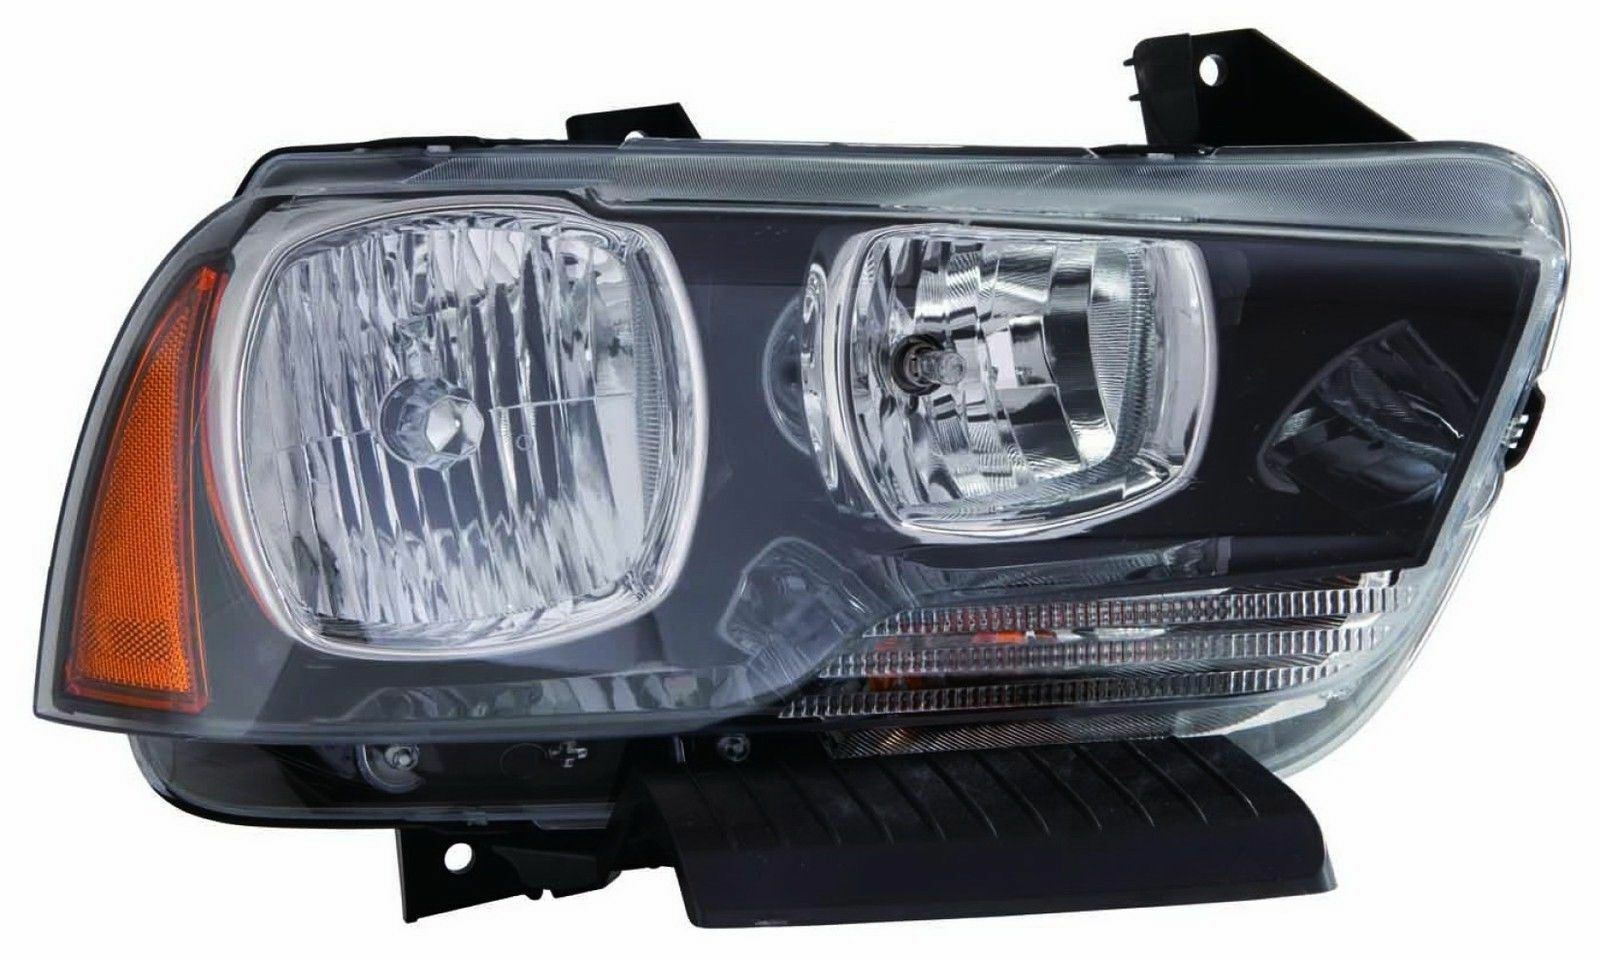 Primary image for DODGE CHARGER 2011-2013 HALOGEN RIGHT PASSENGER HEADLIGHT HEAD LIGHT FRONT LAMP